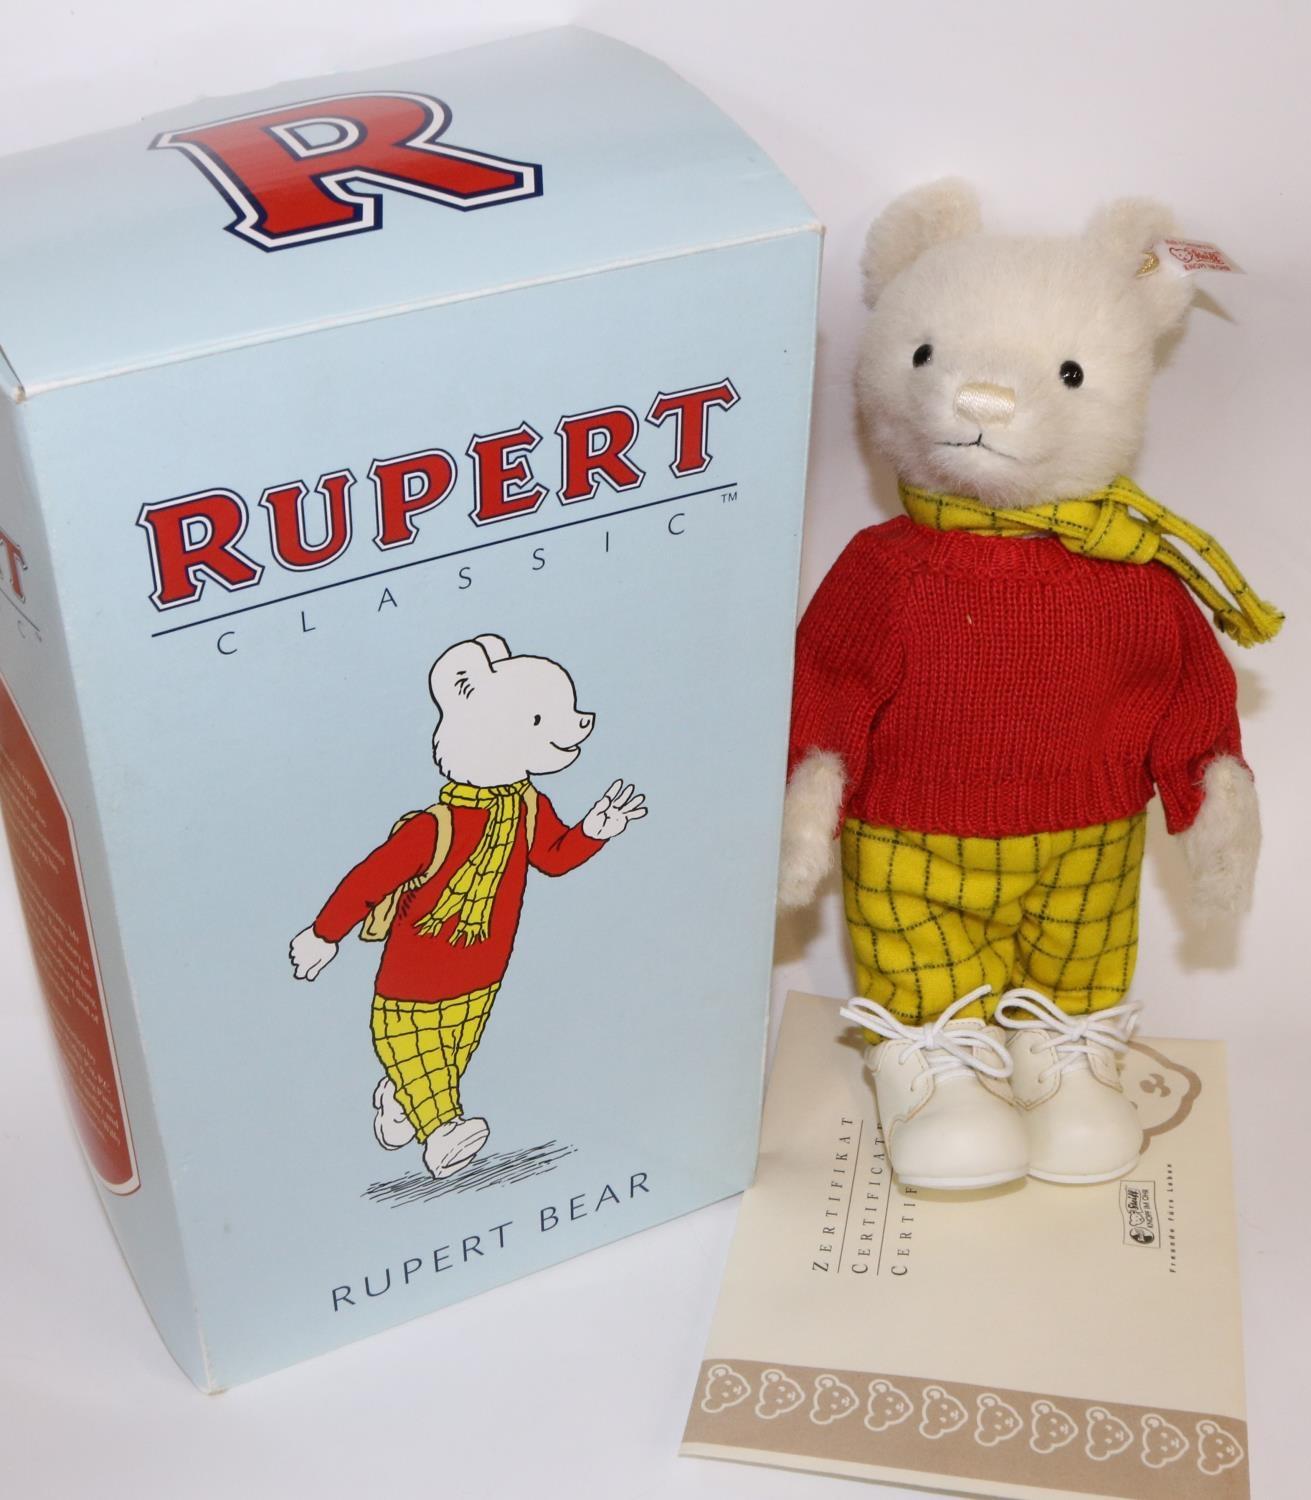 Steiff Classic Rupert Bear, in white, h28cm, complete in box with certificate. Limited Edition